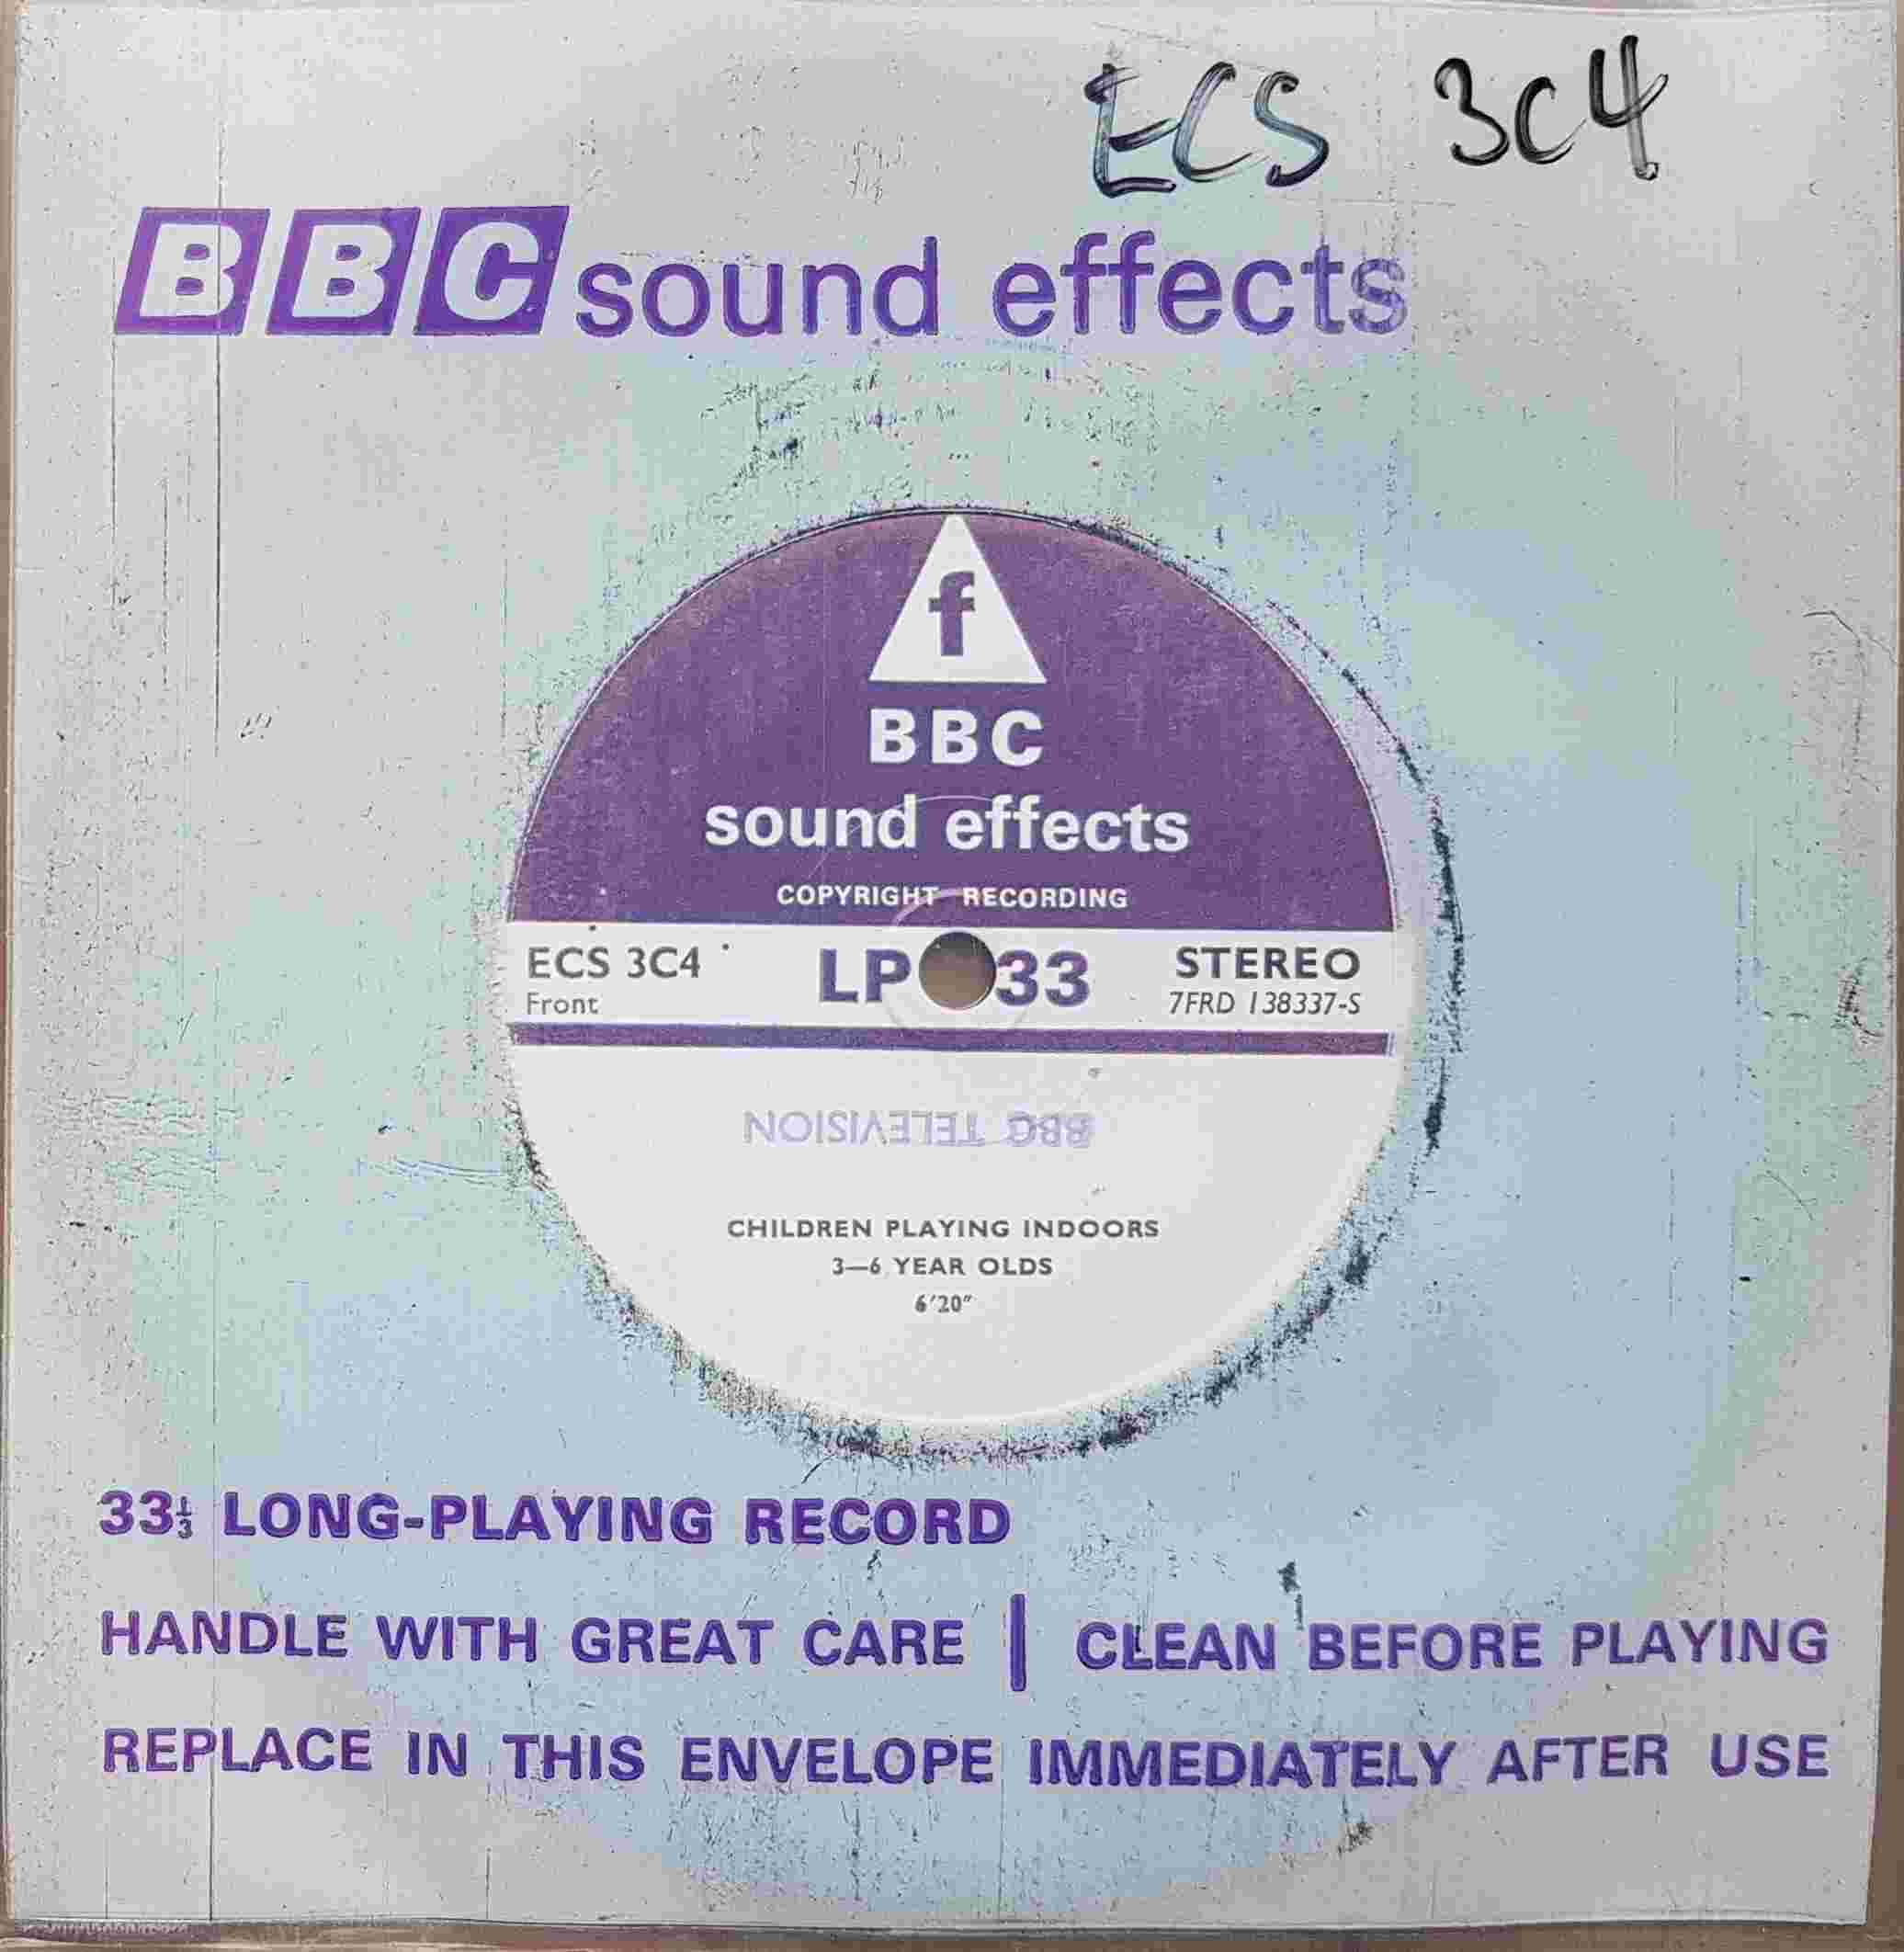 Picture of ECS 3C4 Children playing indoors 3-6 year olds by artist Not registered from the BBC singles - Records and Tapes library